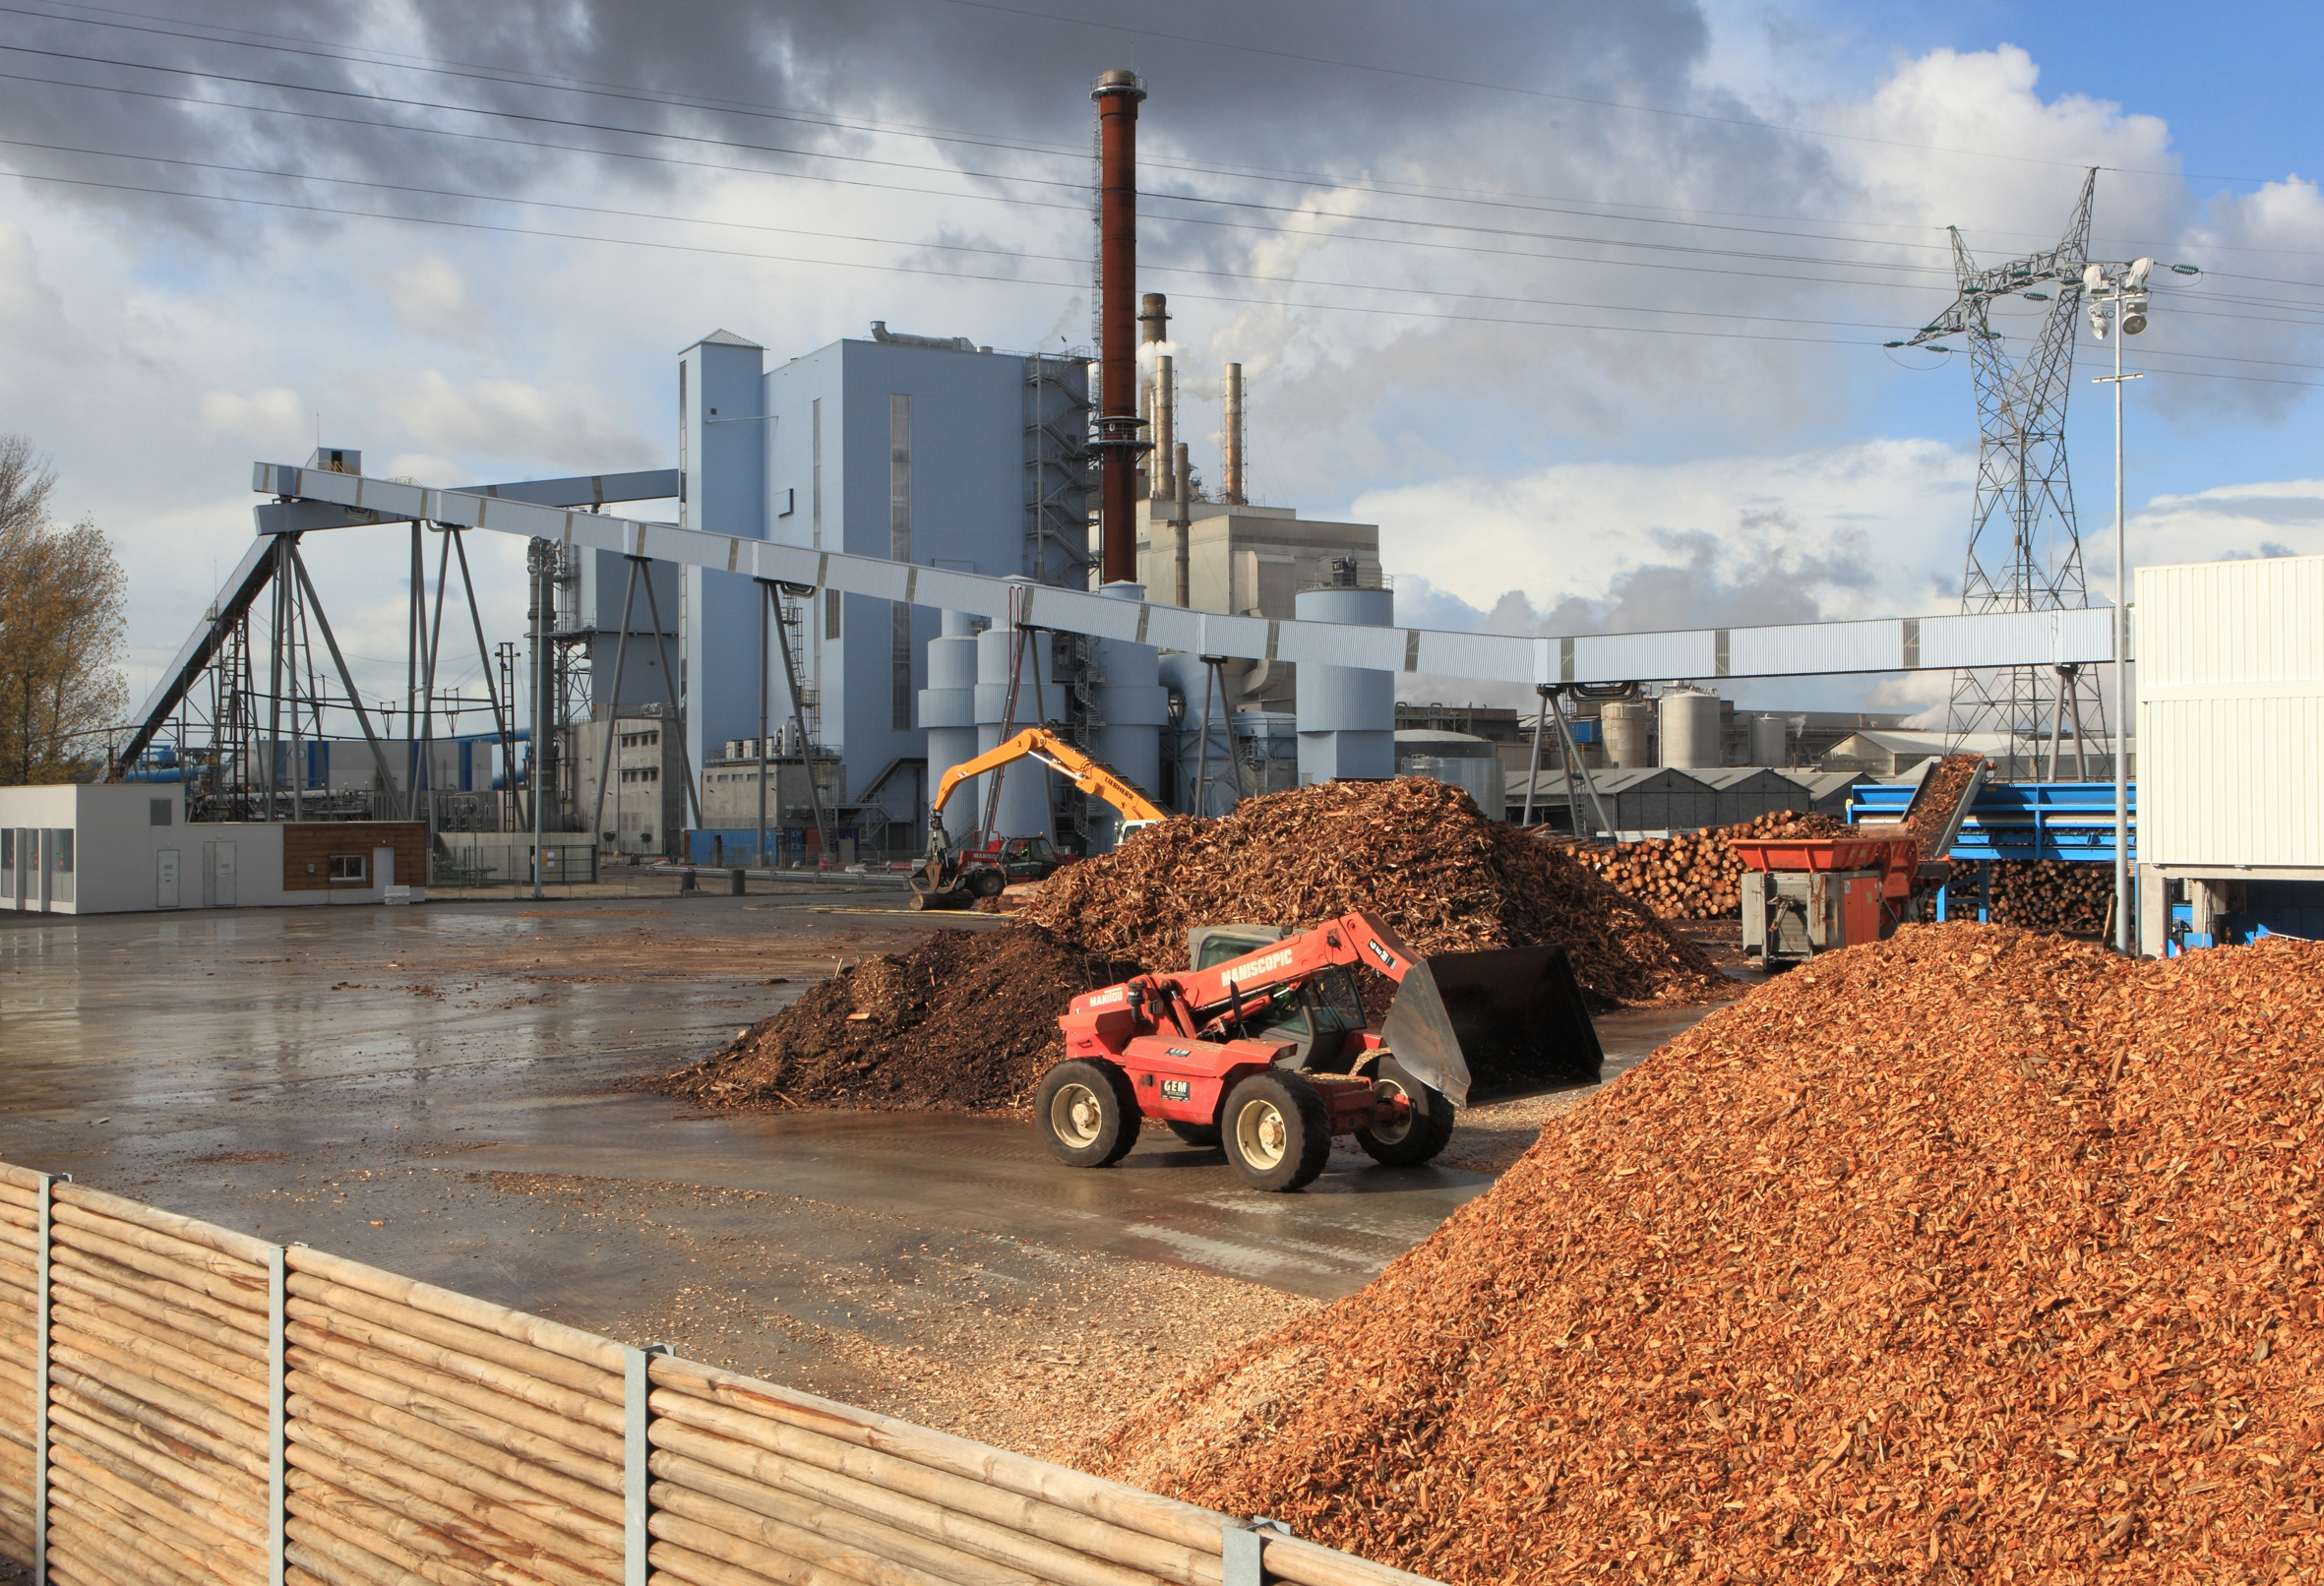  world's largest biomass CHP plant in the UK - Energy Business Europe